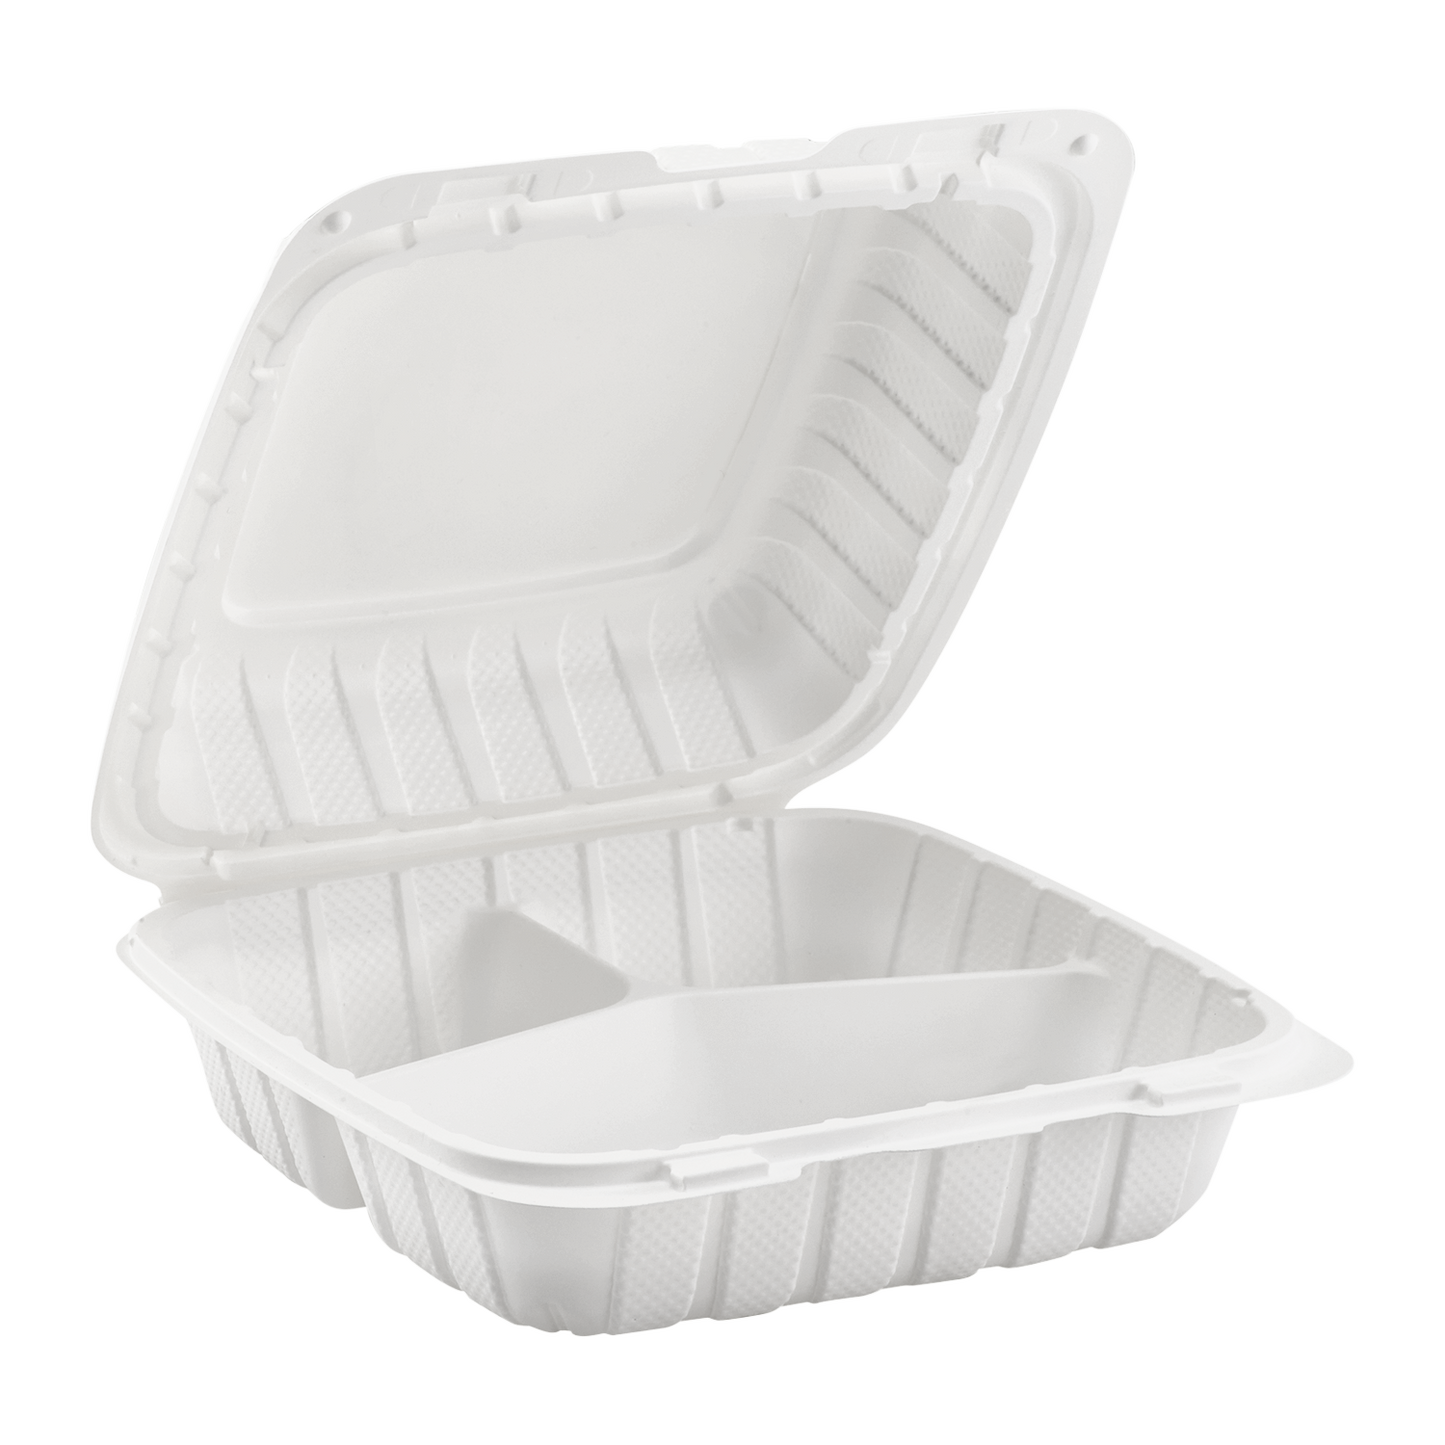 8 x 8 x 3 Sugarcane Bagasse 3 Compartment Clamshell Container